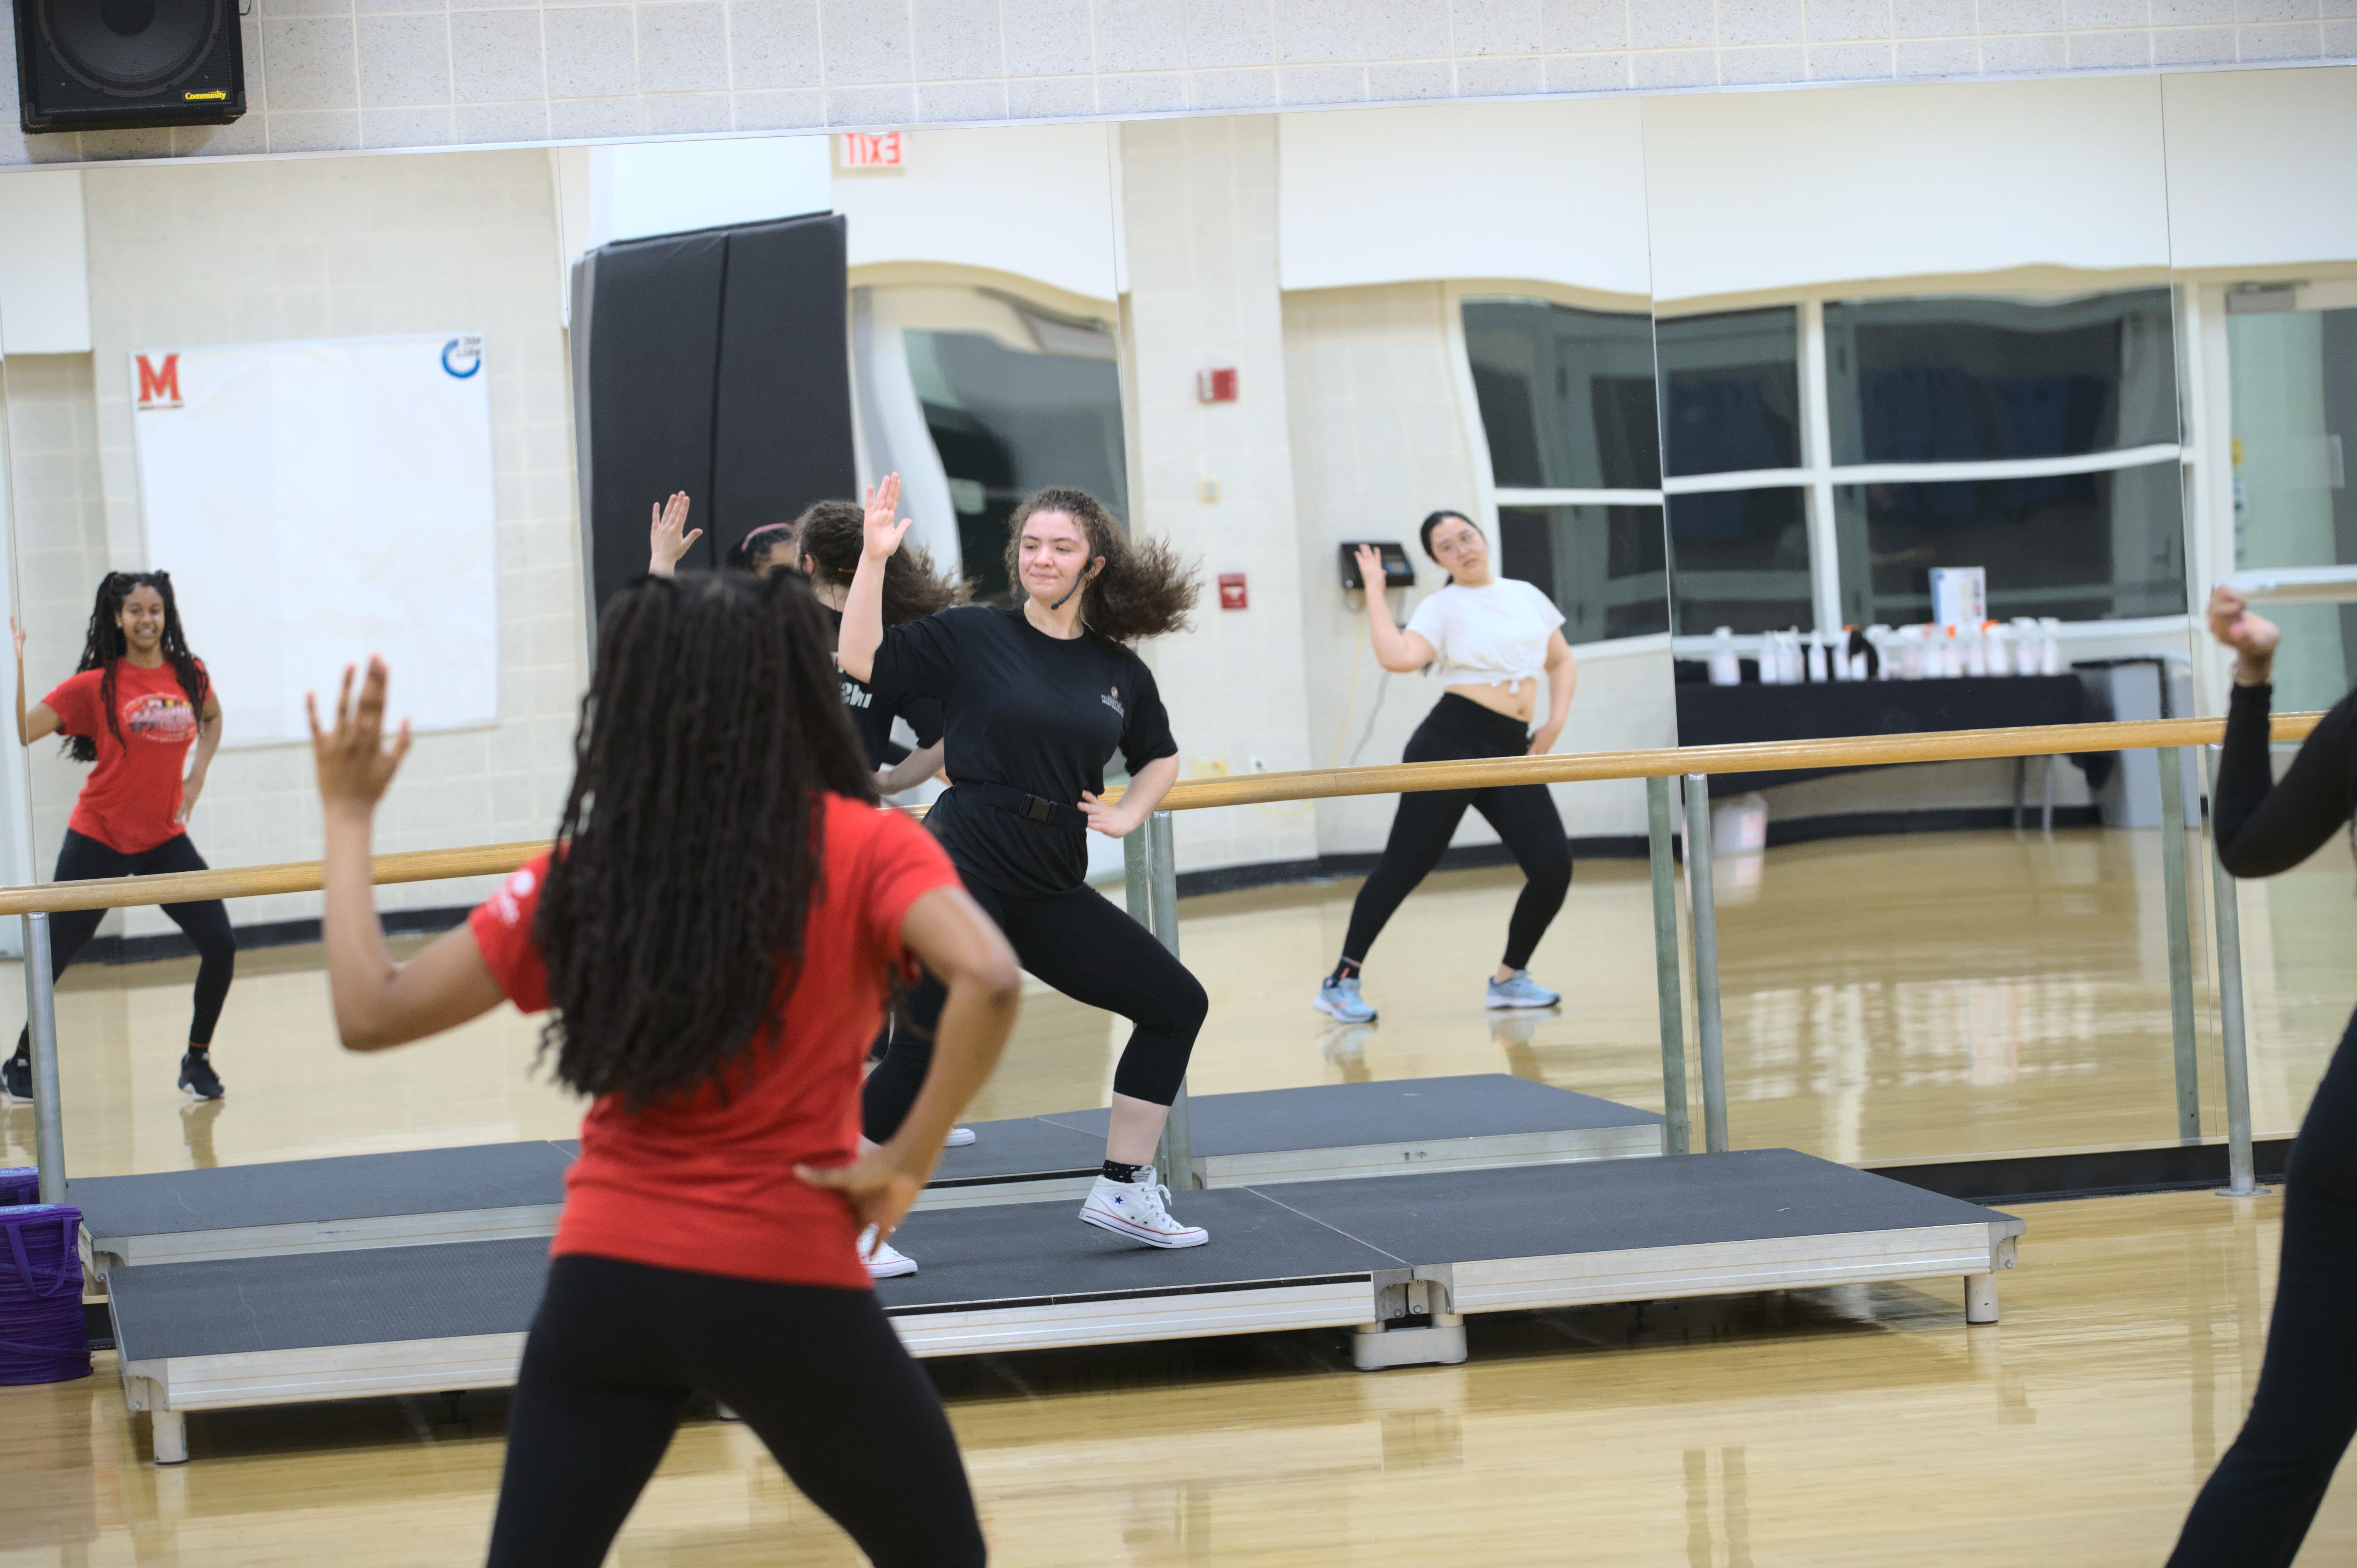 group fitness instructor leads a dancefit class